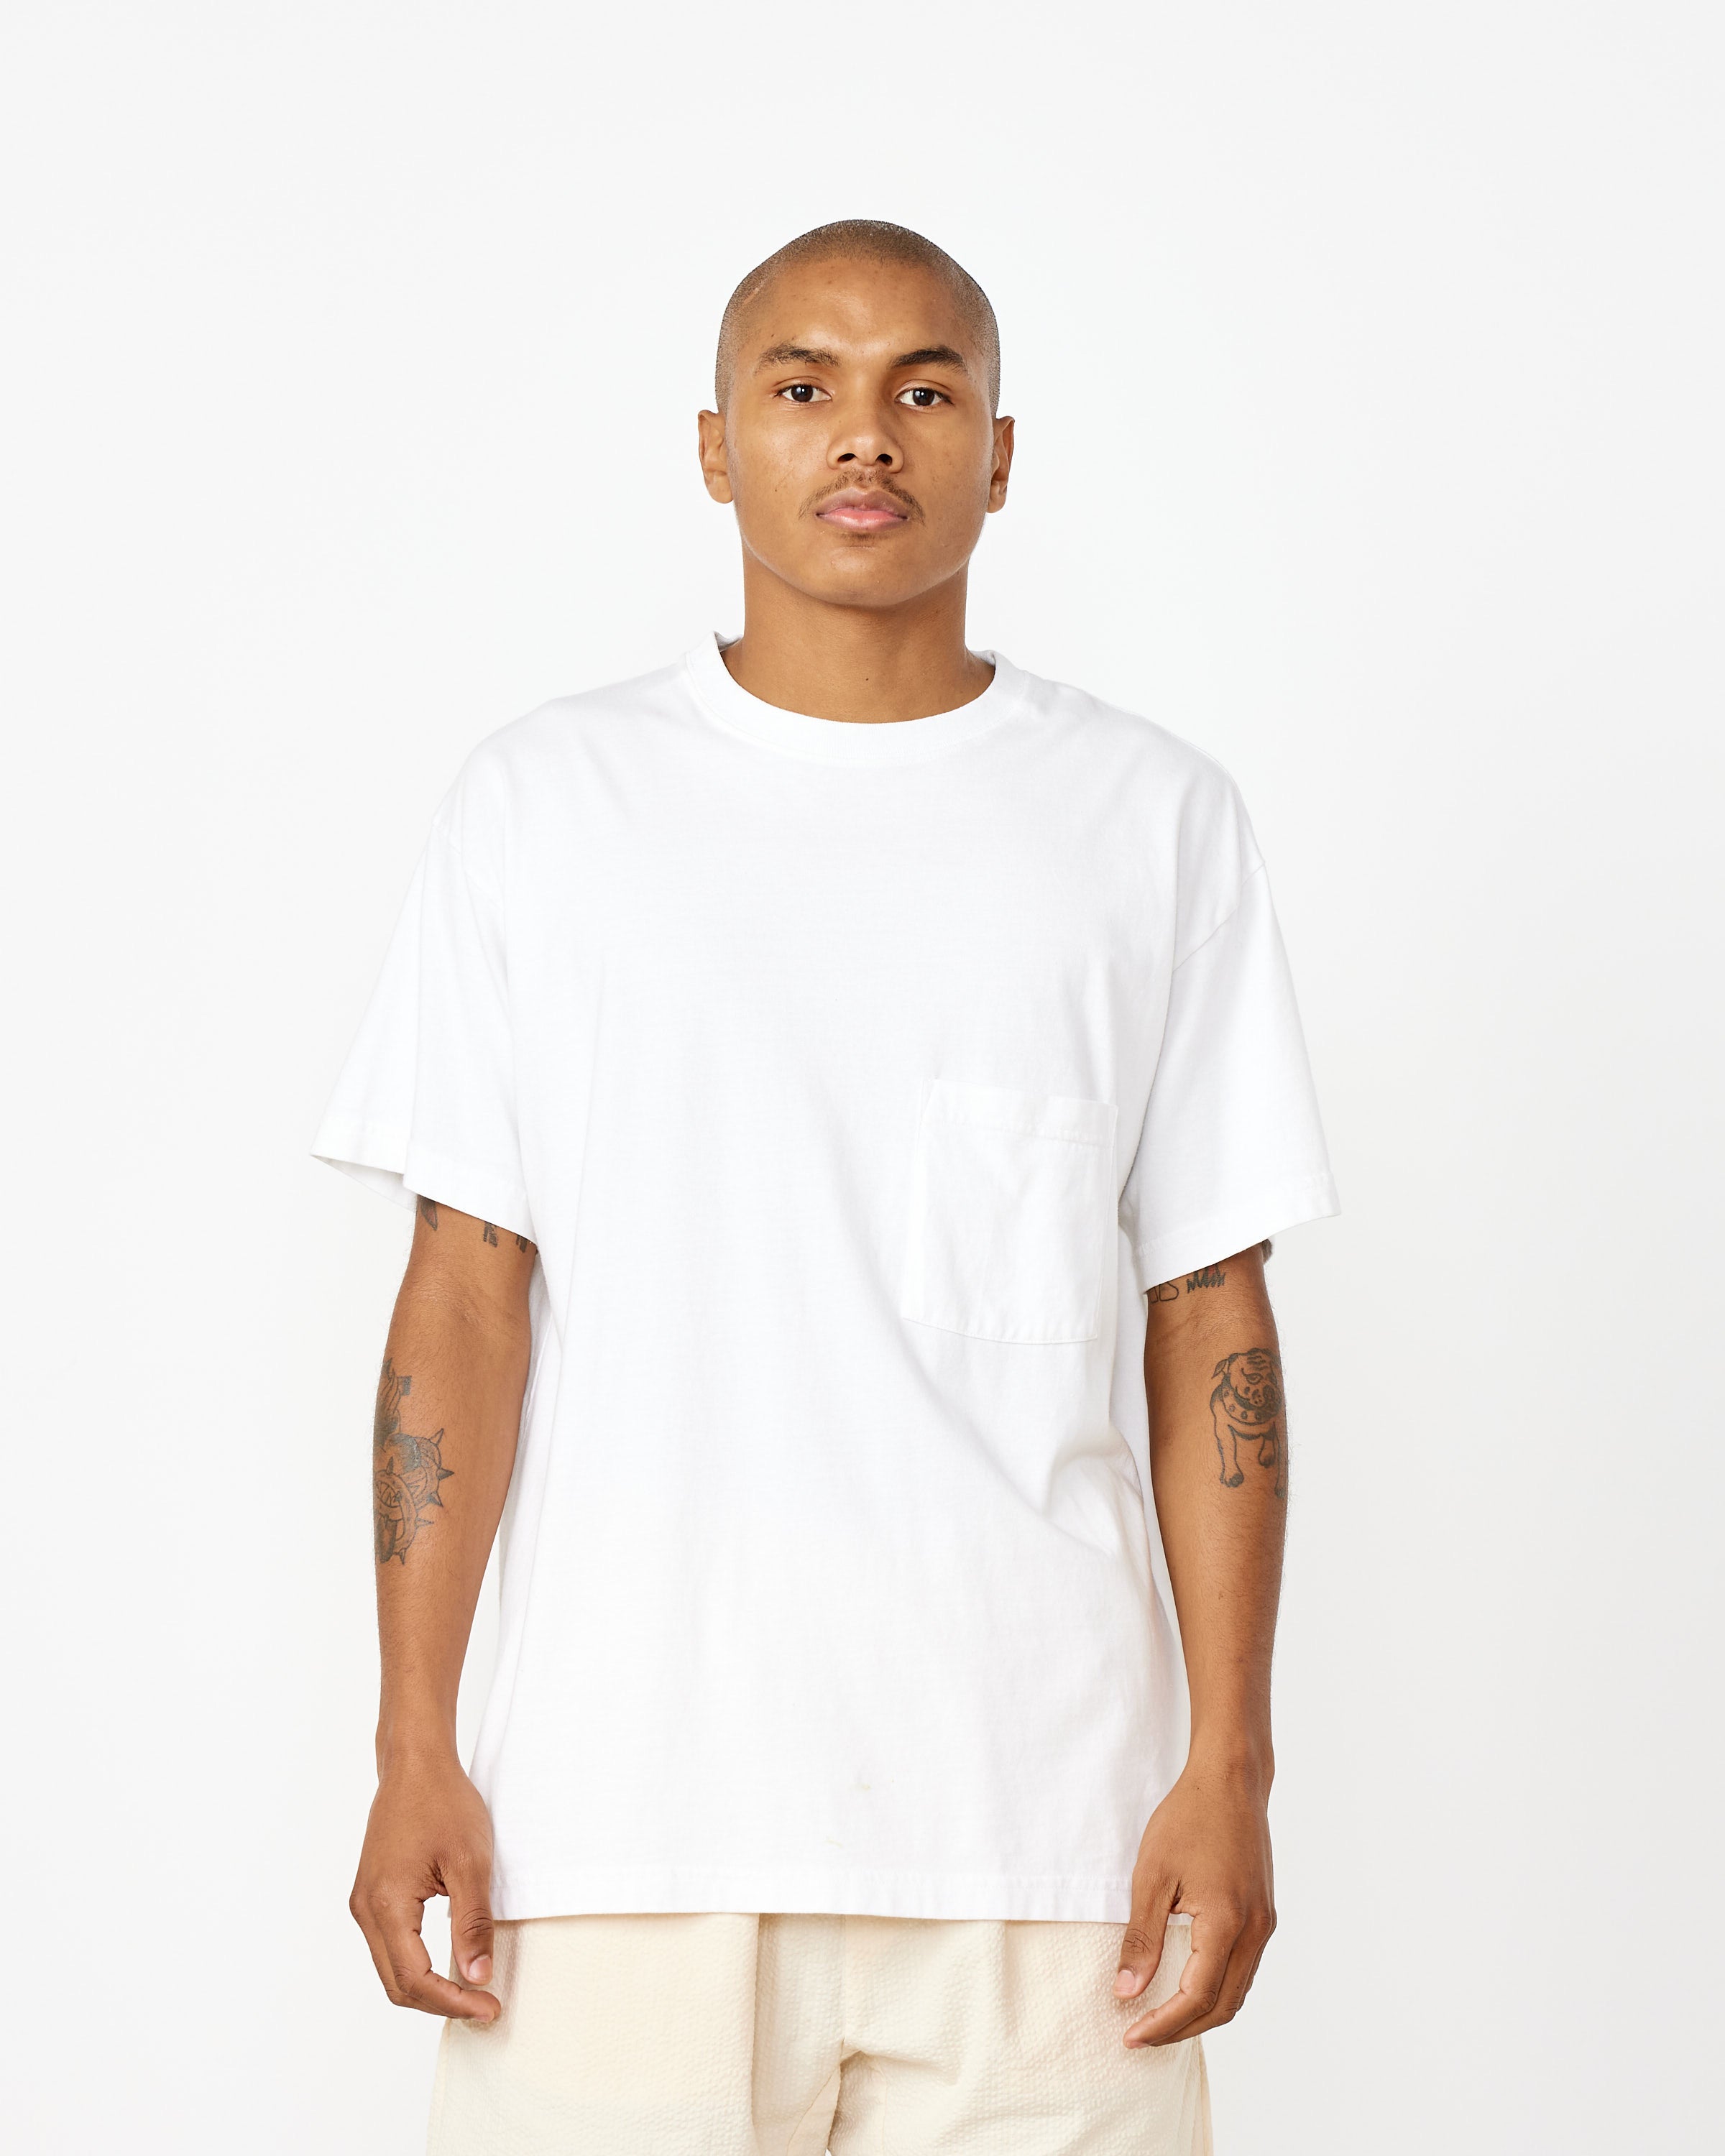 Big Pocket Tee in White